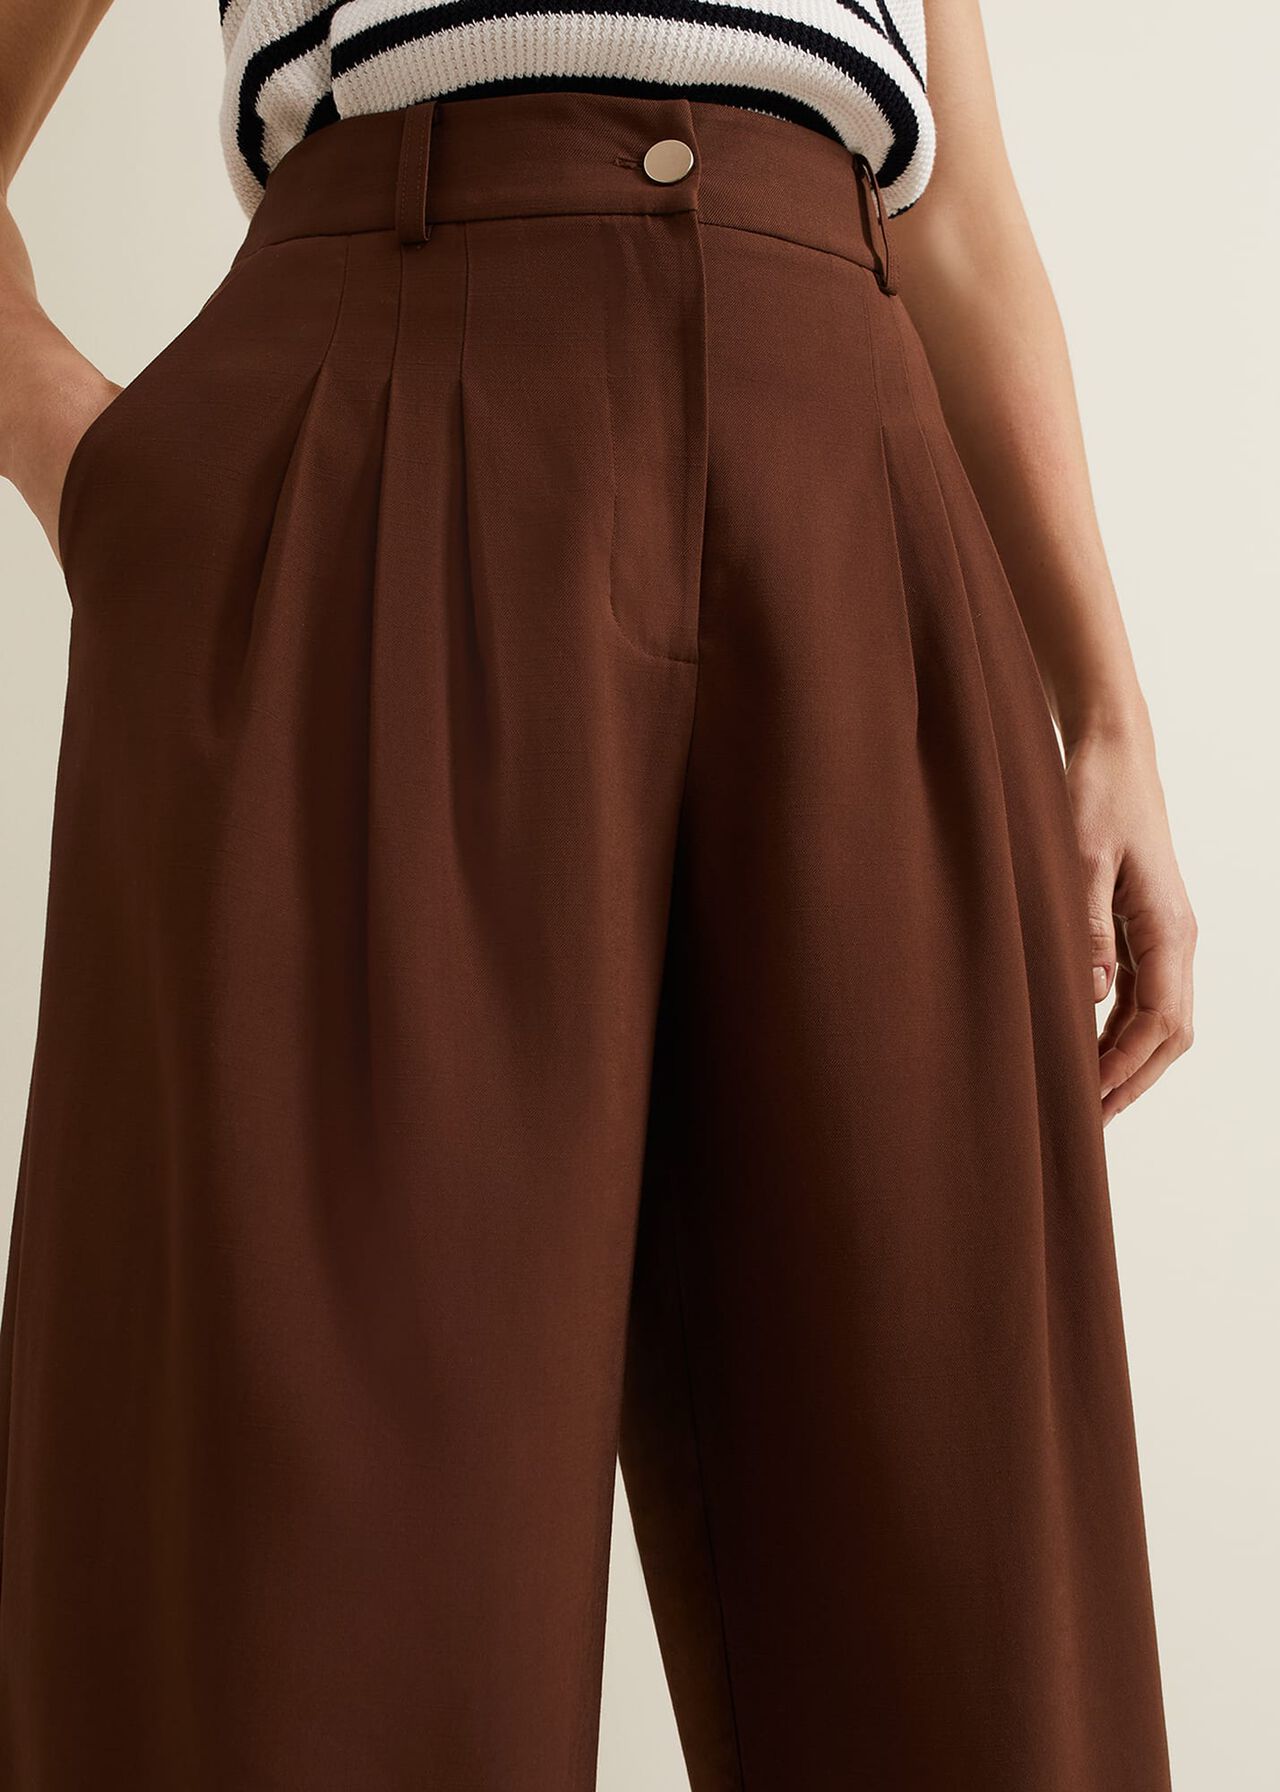 Indiyah Pleated Wide Leg Trousers